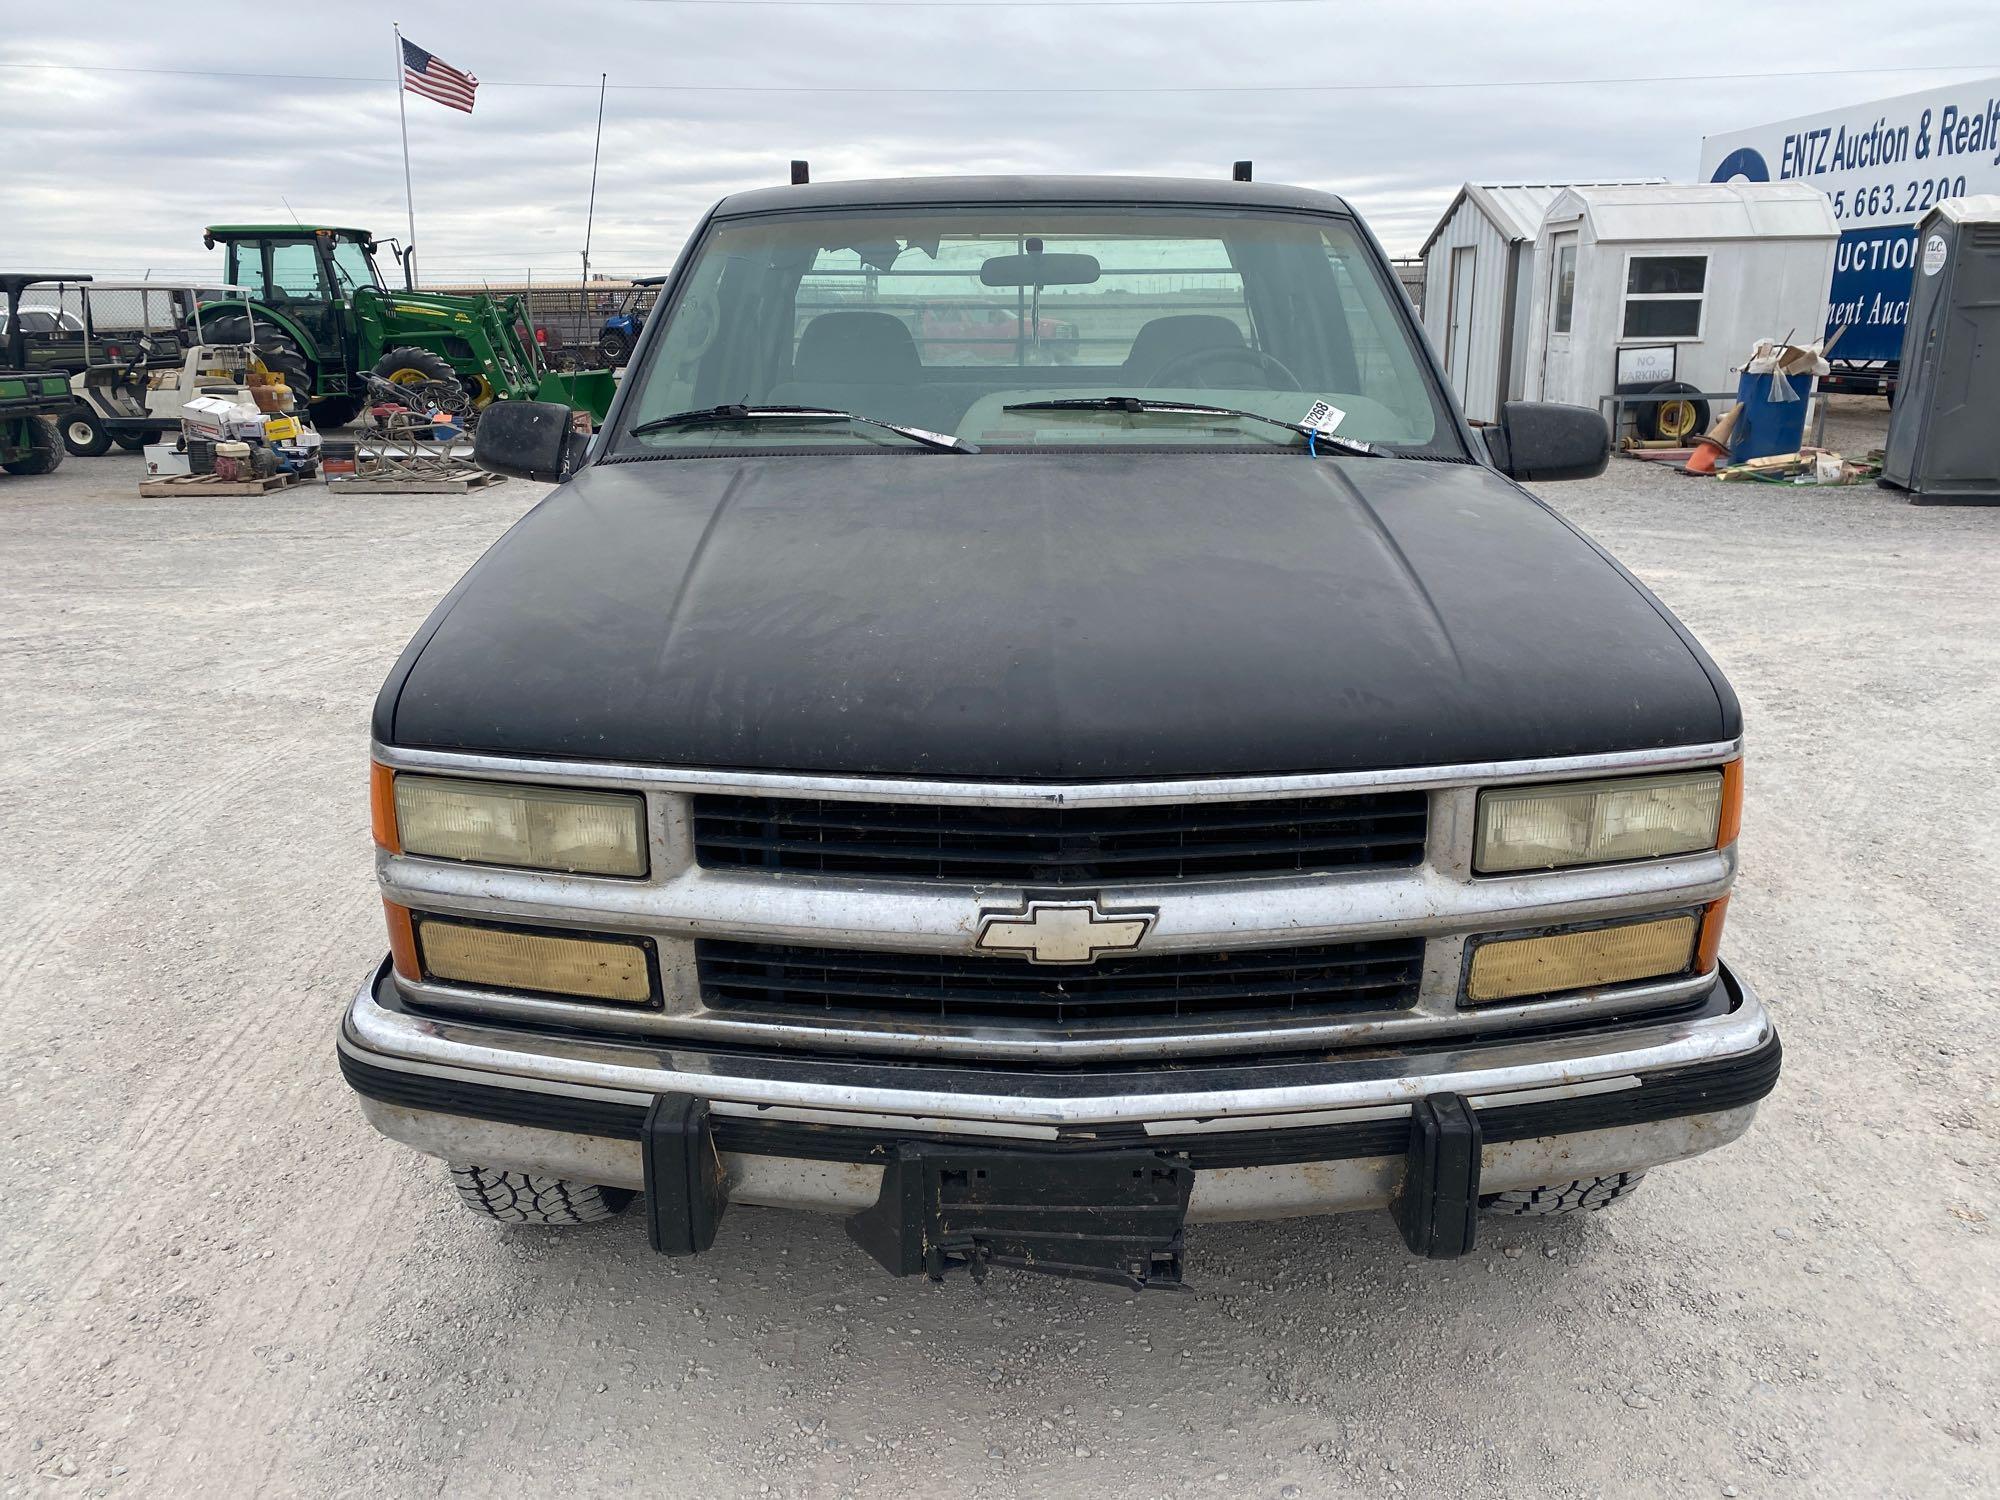 1995 CHEVY 2500 FLATBED PICKUP, 350, GAS, 5 SPEED,